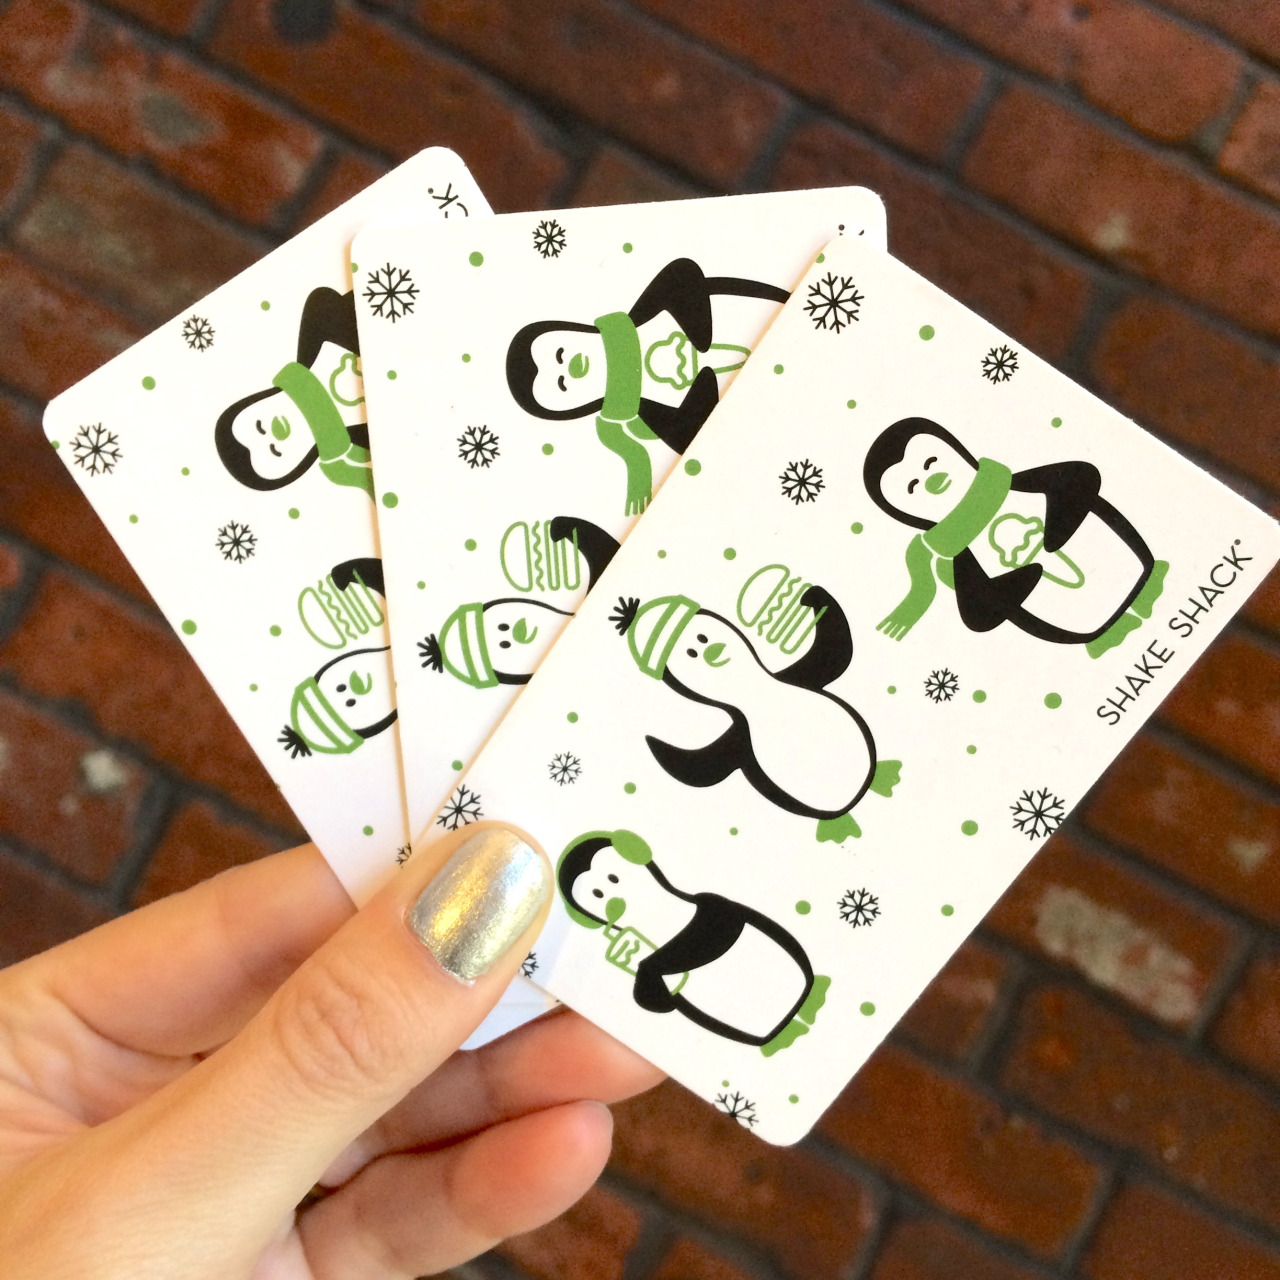 Tis The Season For Shack Pick Up A 25 Shake Gift Card